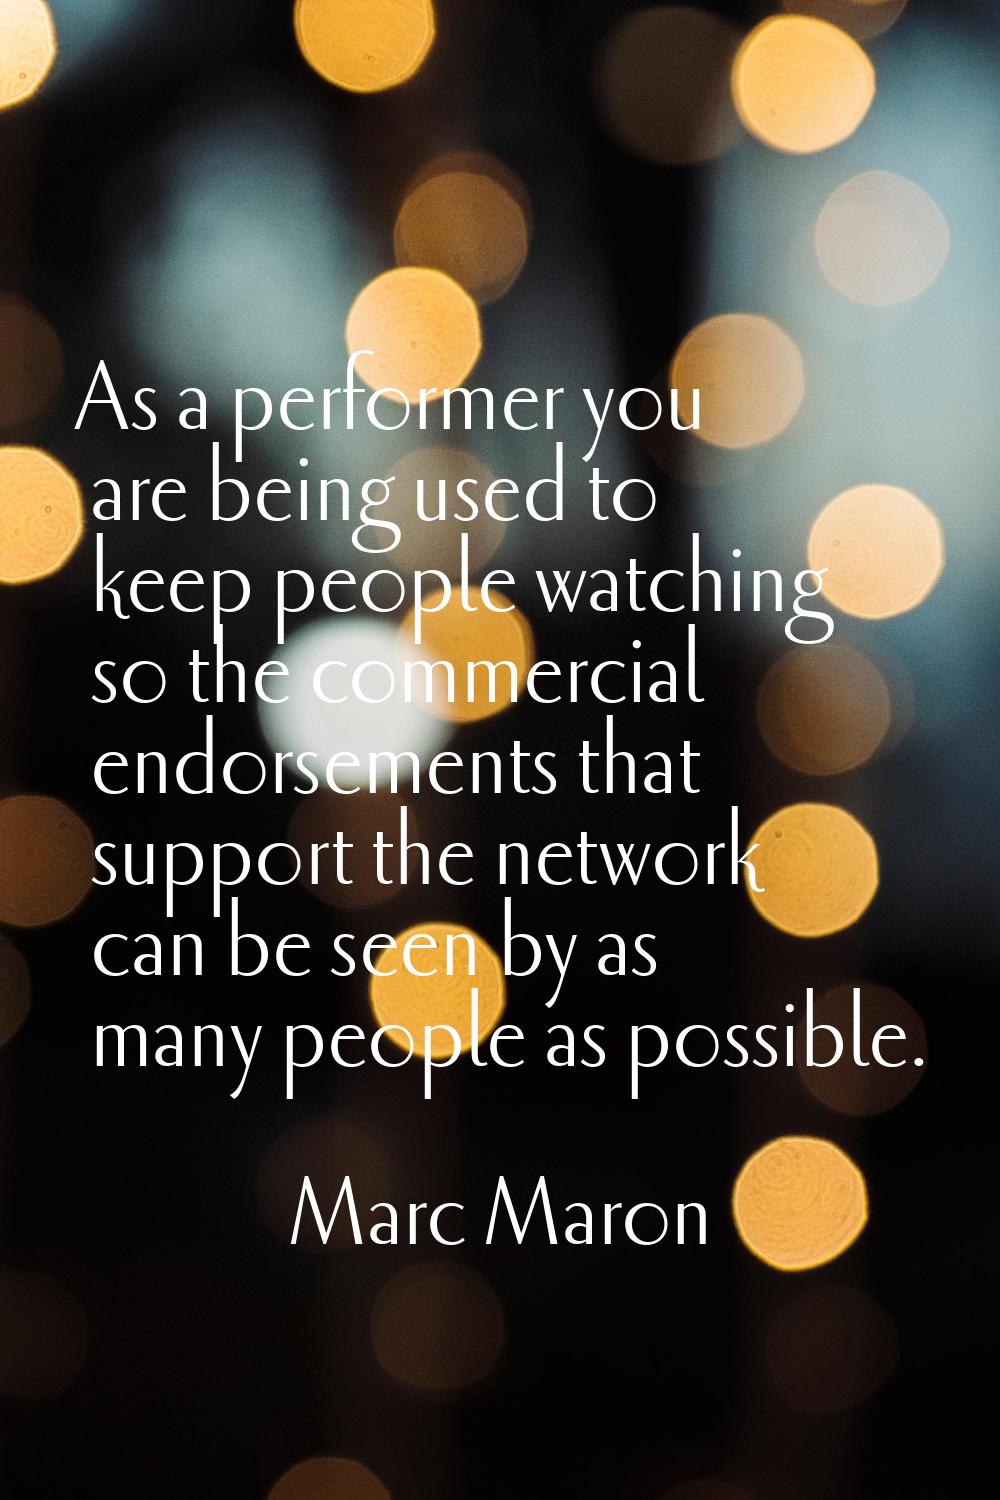 As a performer you are being used to keep people watching so the commercial endorsements that suppo